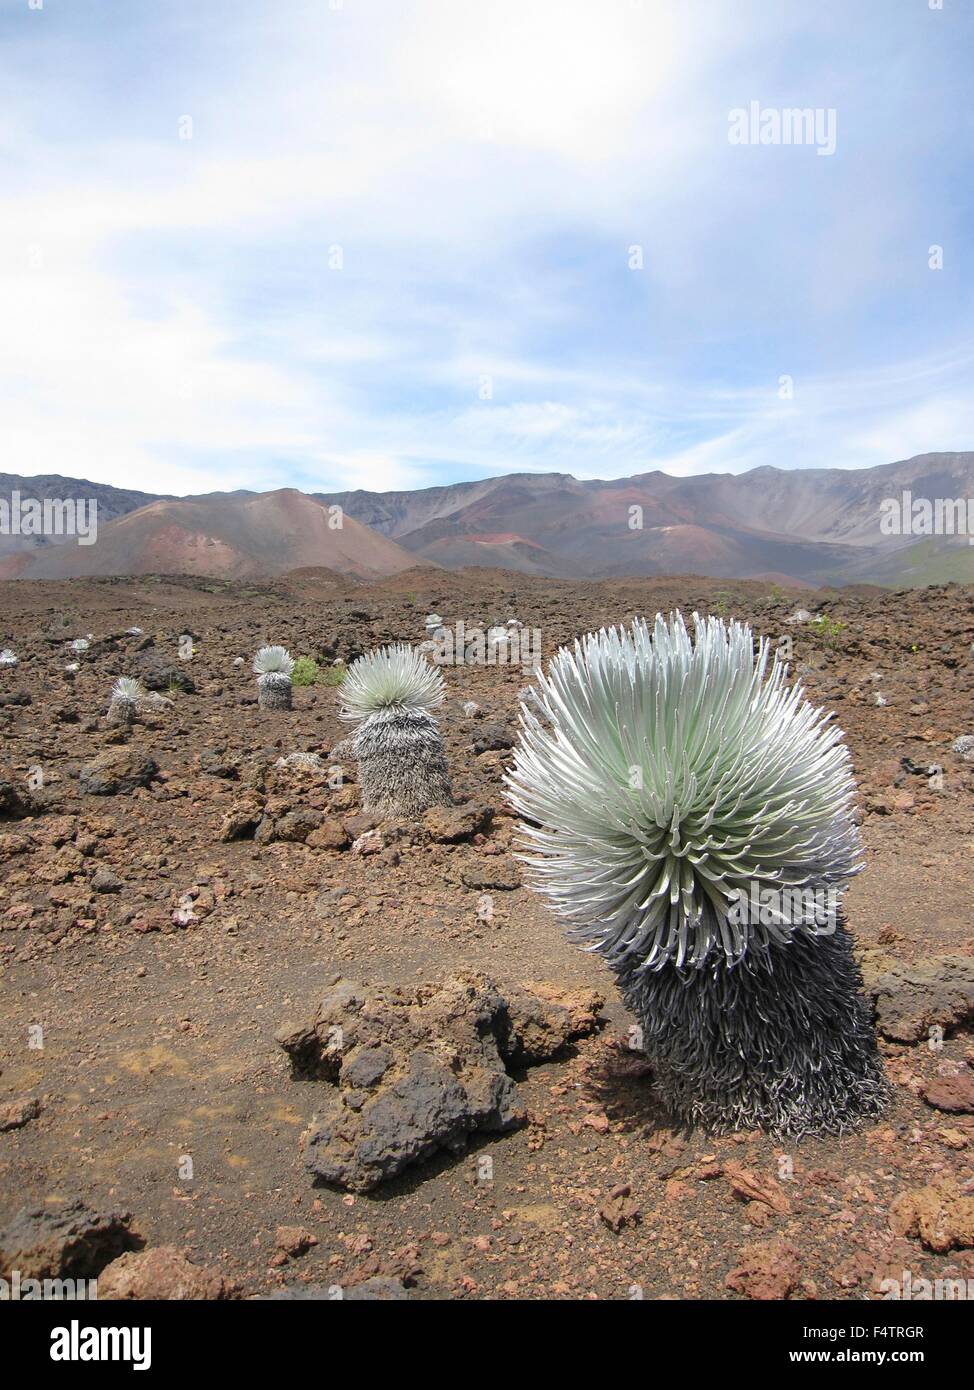 A Haleakala silverswords plant in a desolate cinder field crater along the Sliding Sands Trail at the Haleakalā National Park, Hawaii. The silversword is an endangered species that is found only within Haleakalā National Park on the cinder slopes of Haleakalā Crater. Stock Photo